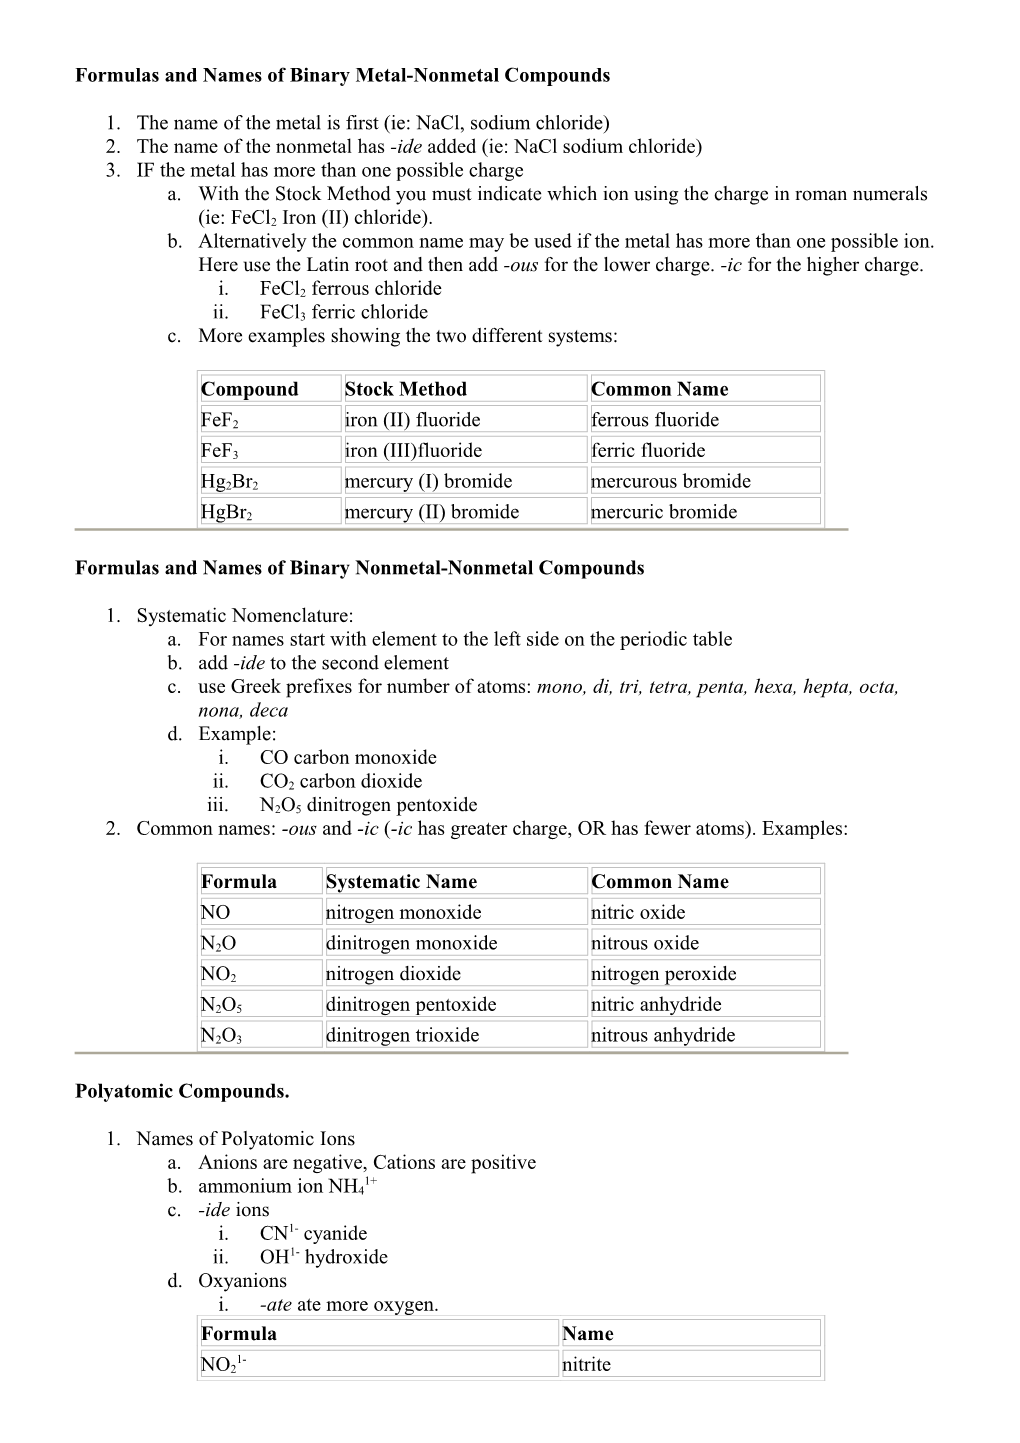 Formulas and Names of Binary Metal-Nonmetal Compounds